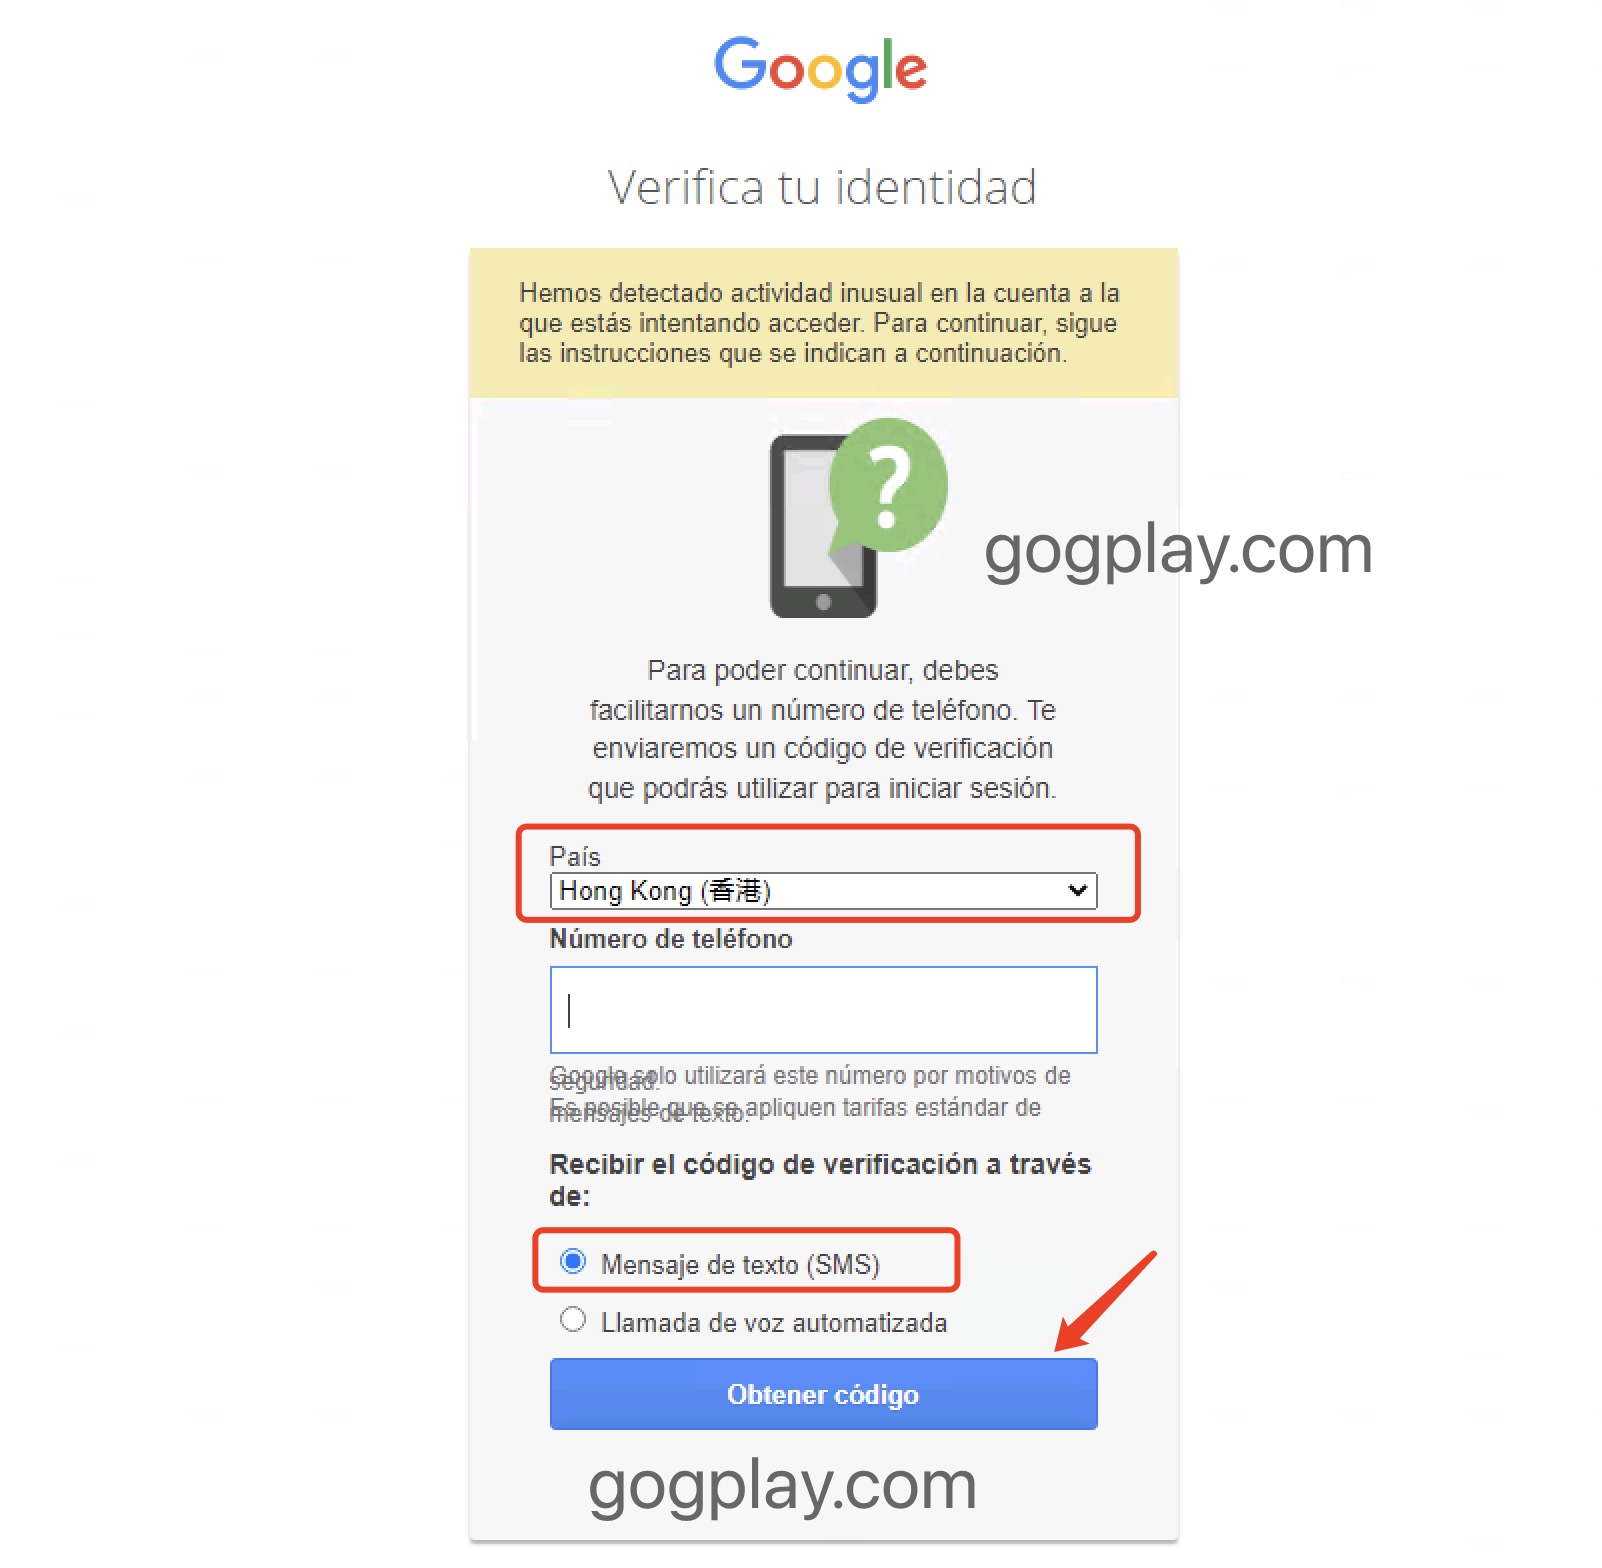 How to check the status of Google account (gmail) without logging in,Google account abnormal performance